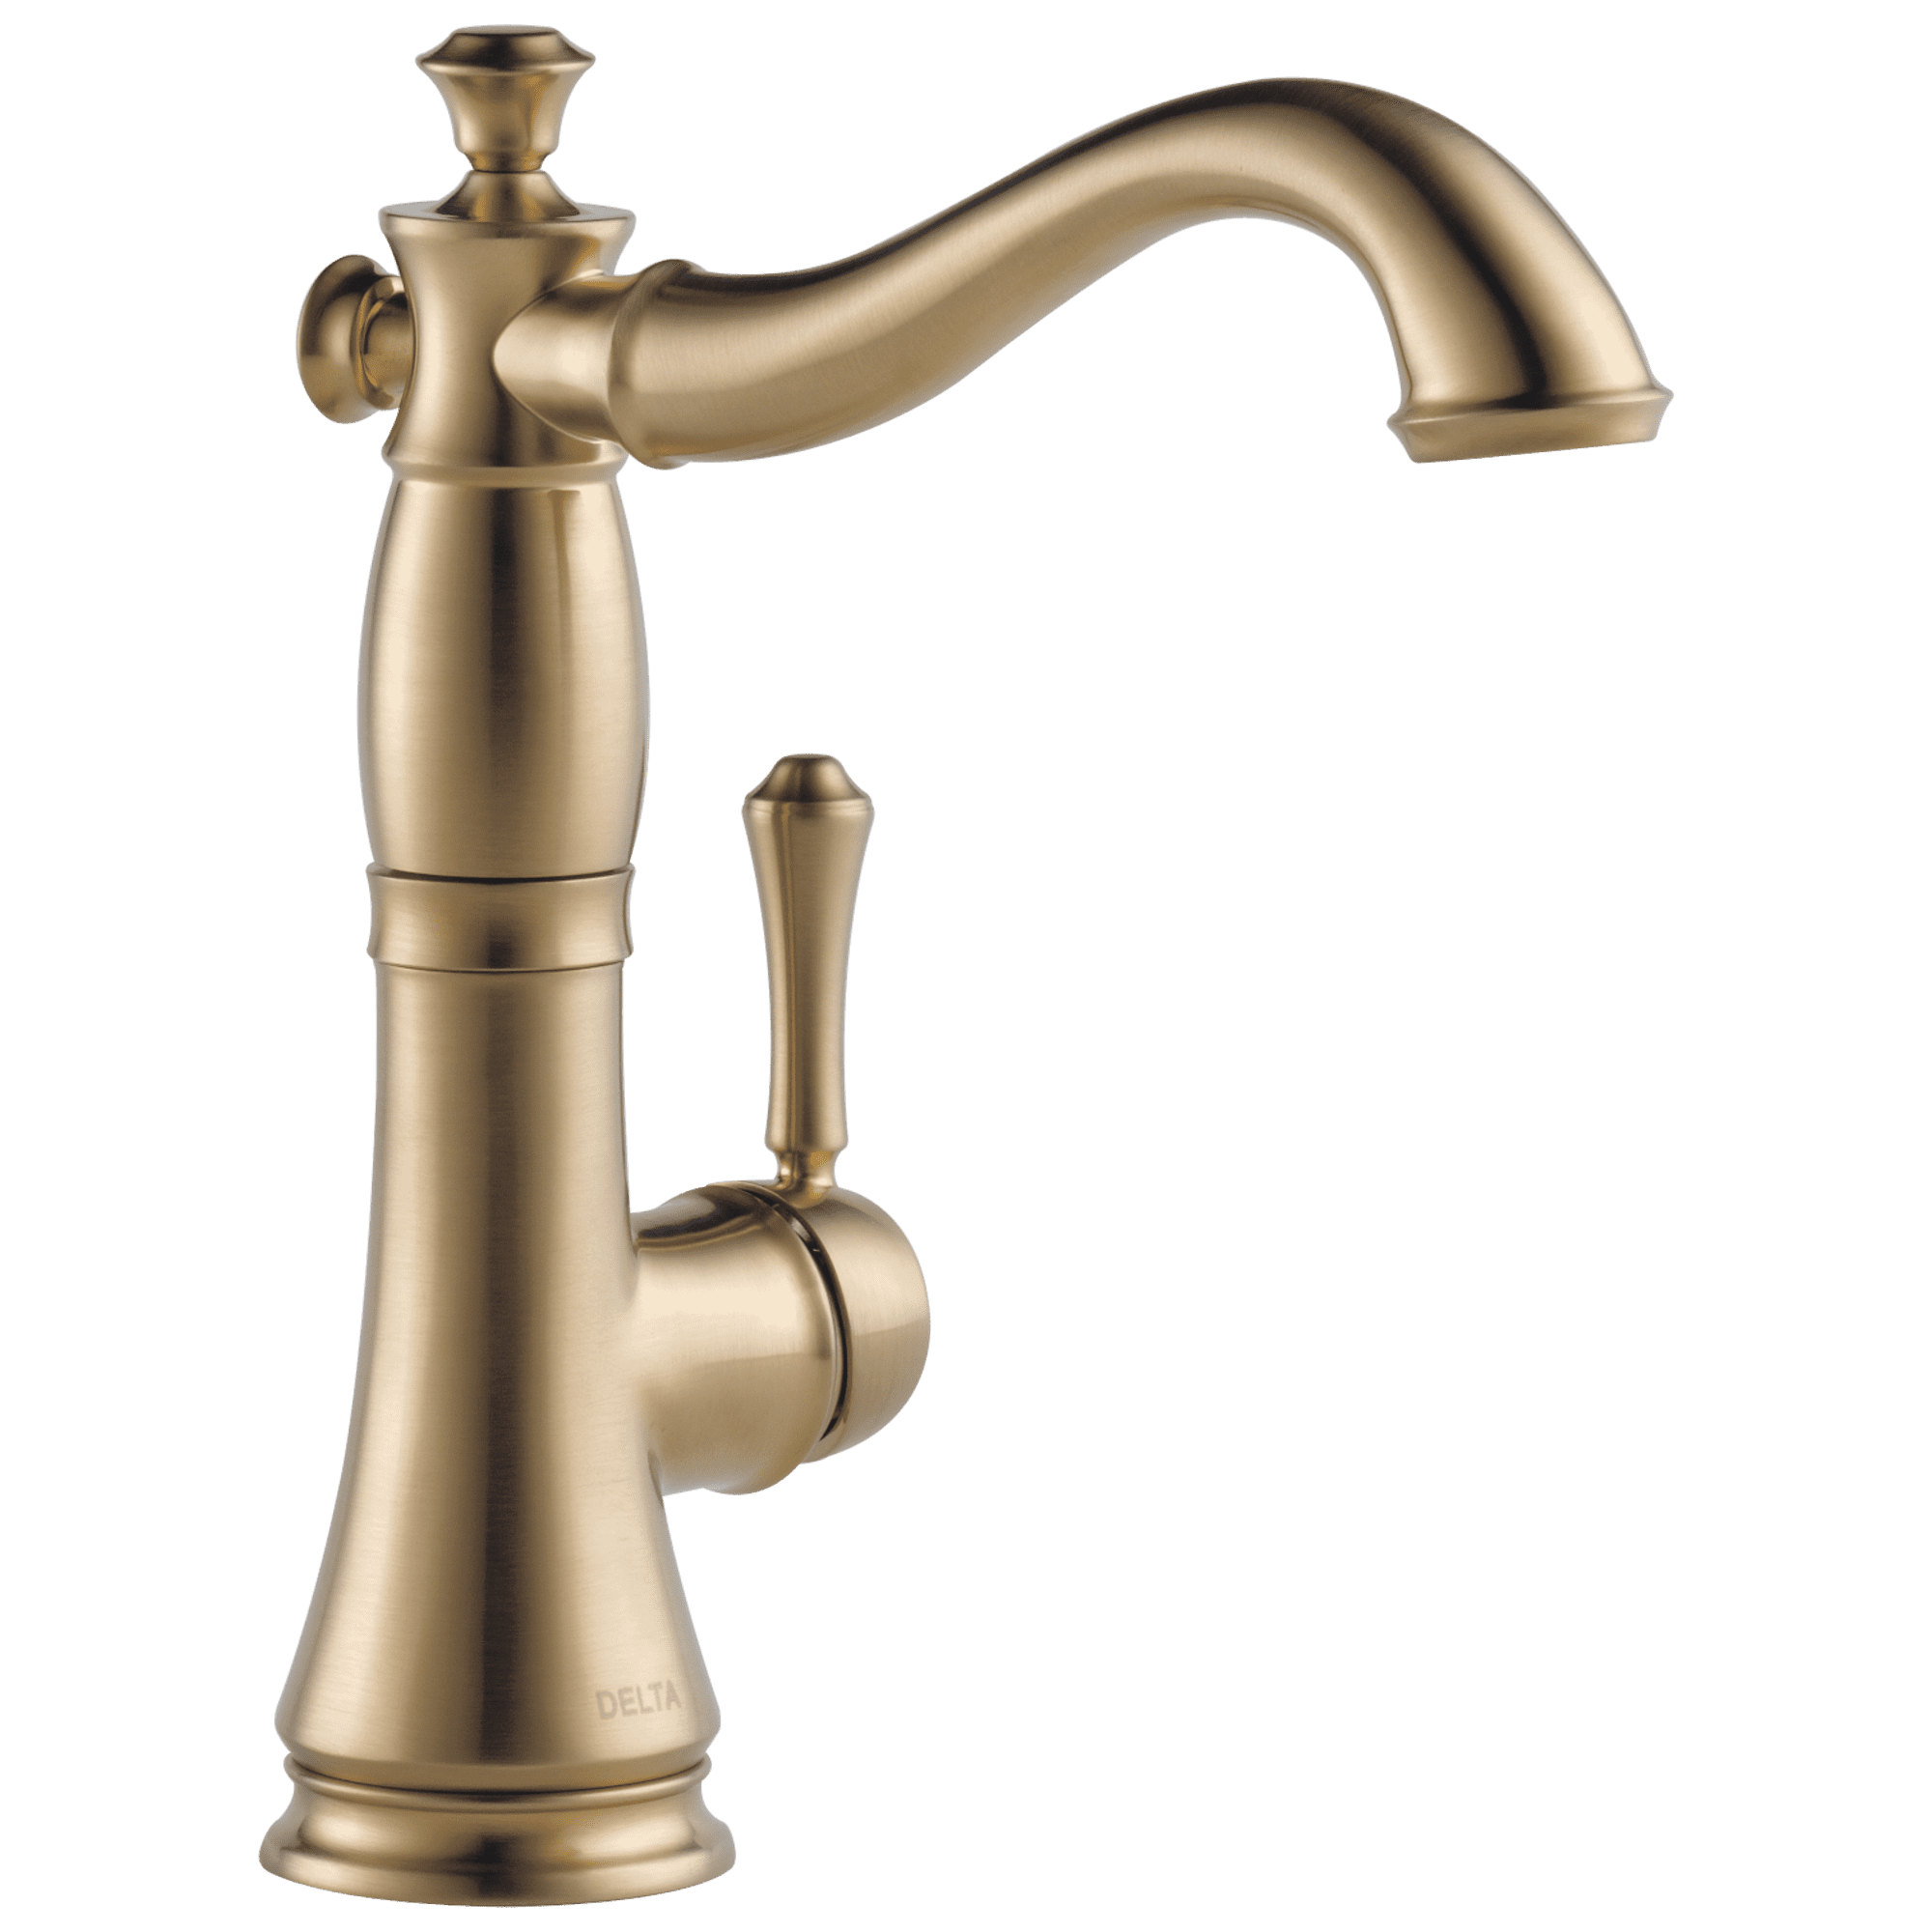 Elegant Cassidy Champagne Bronze Bar Faucet with 360-Degree Swivel